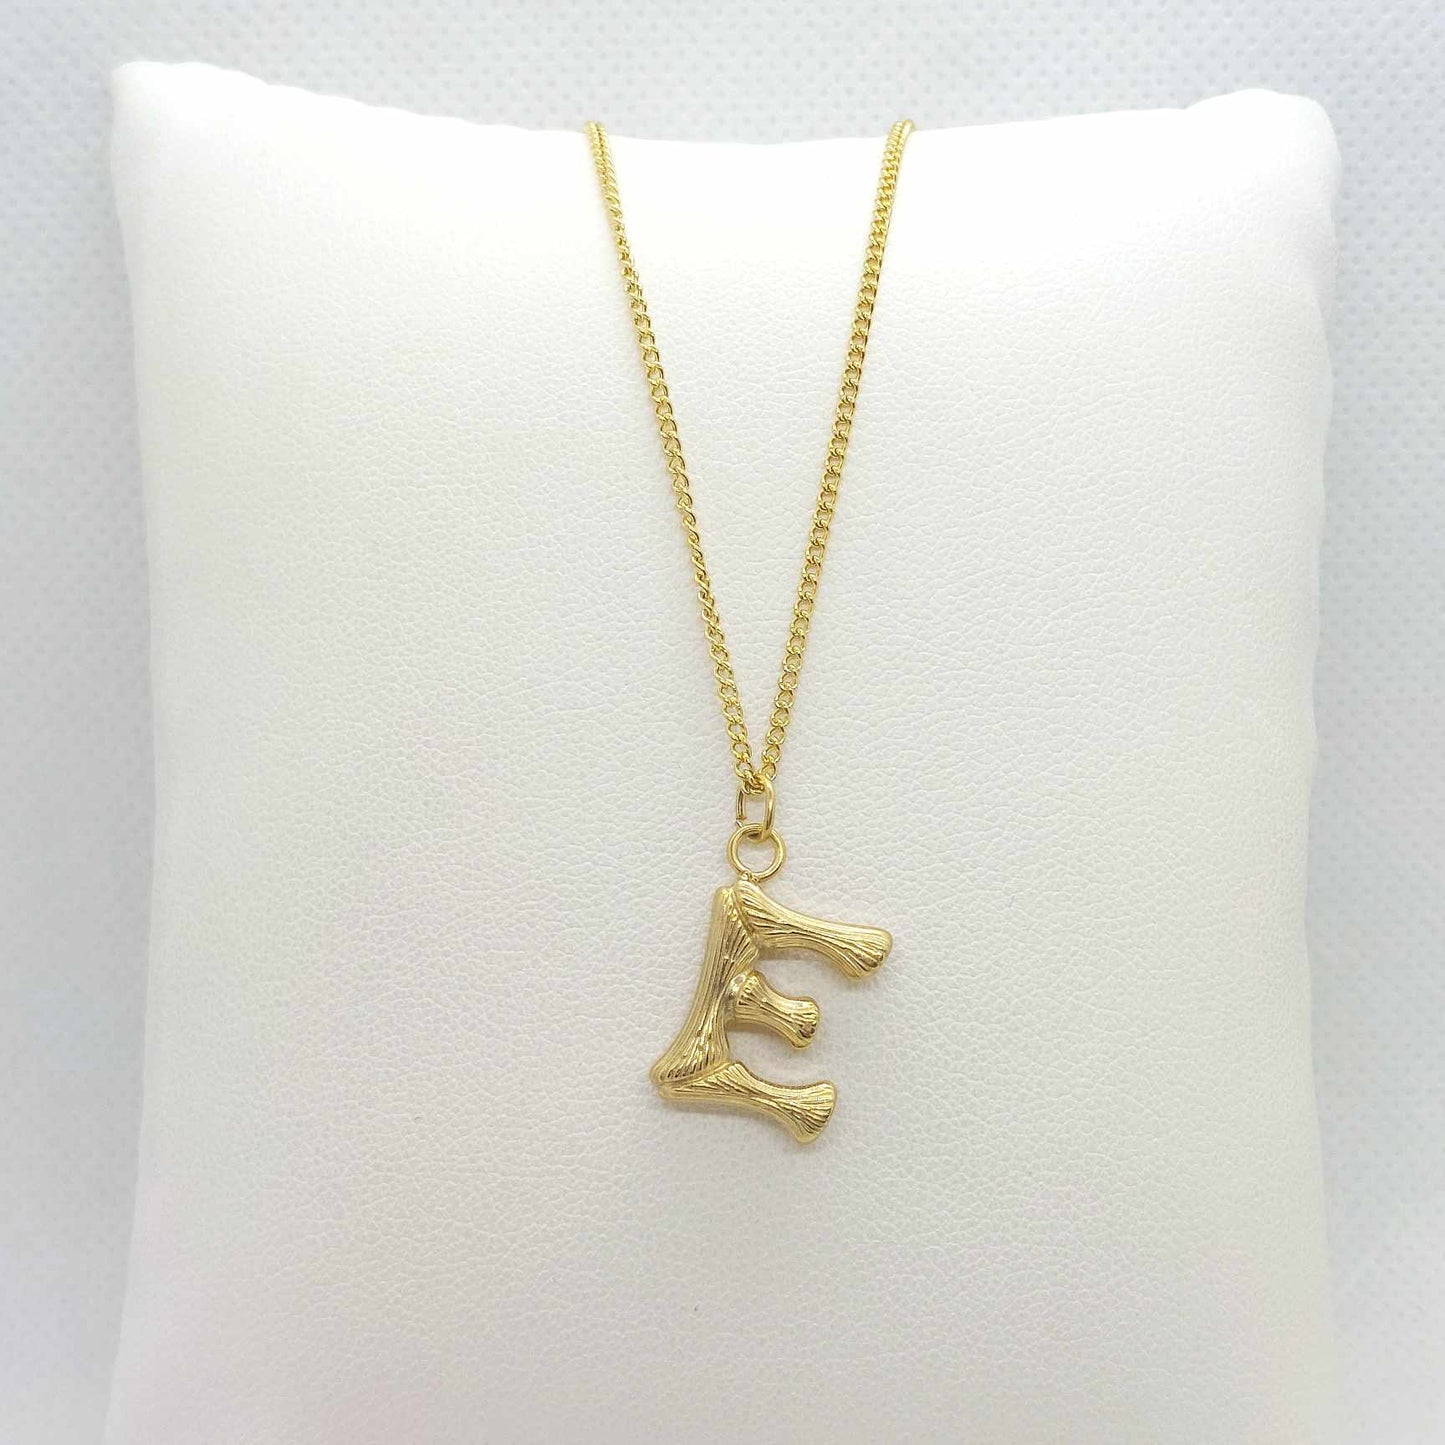 Initial E in Wood Design Pendant with Stainless Steel Chain Necklace